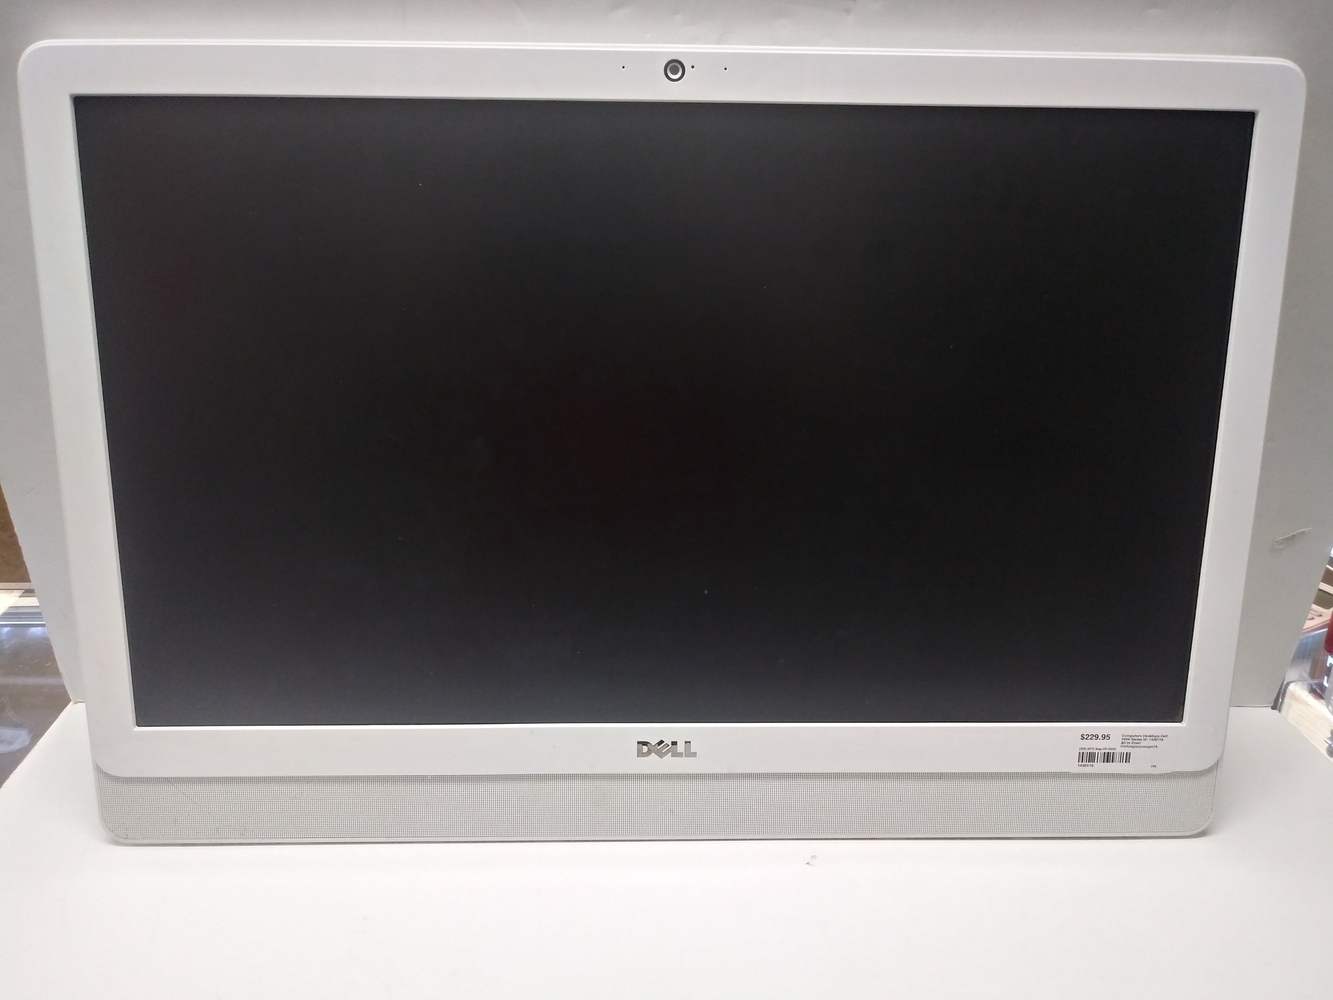 Dell Inspiron 24-3455 AMD A6 Windows 10 Desktop with Mouse and Keyboard